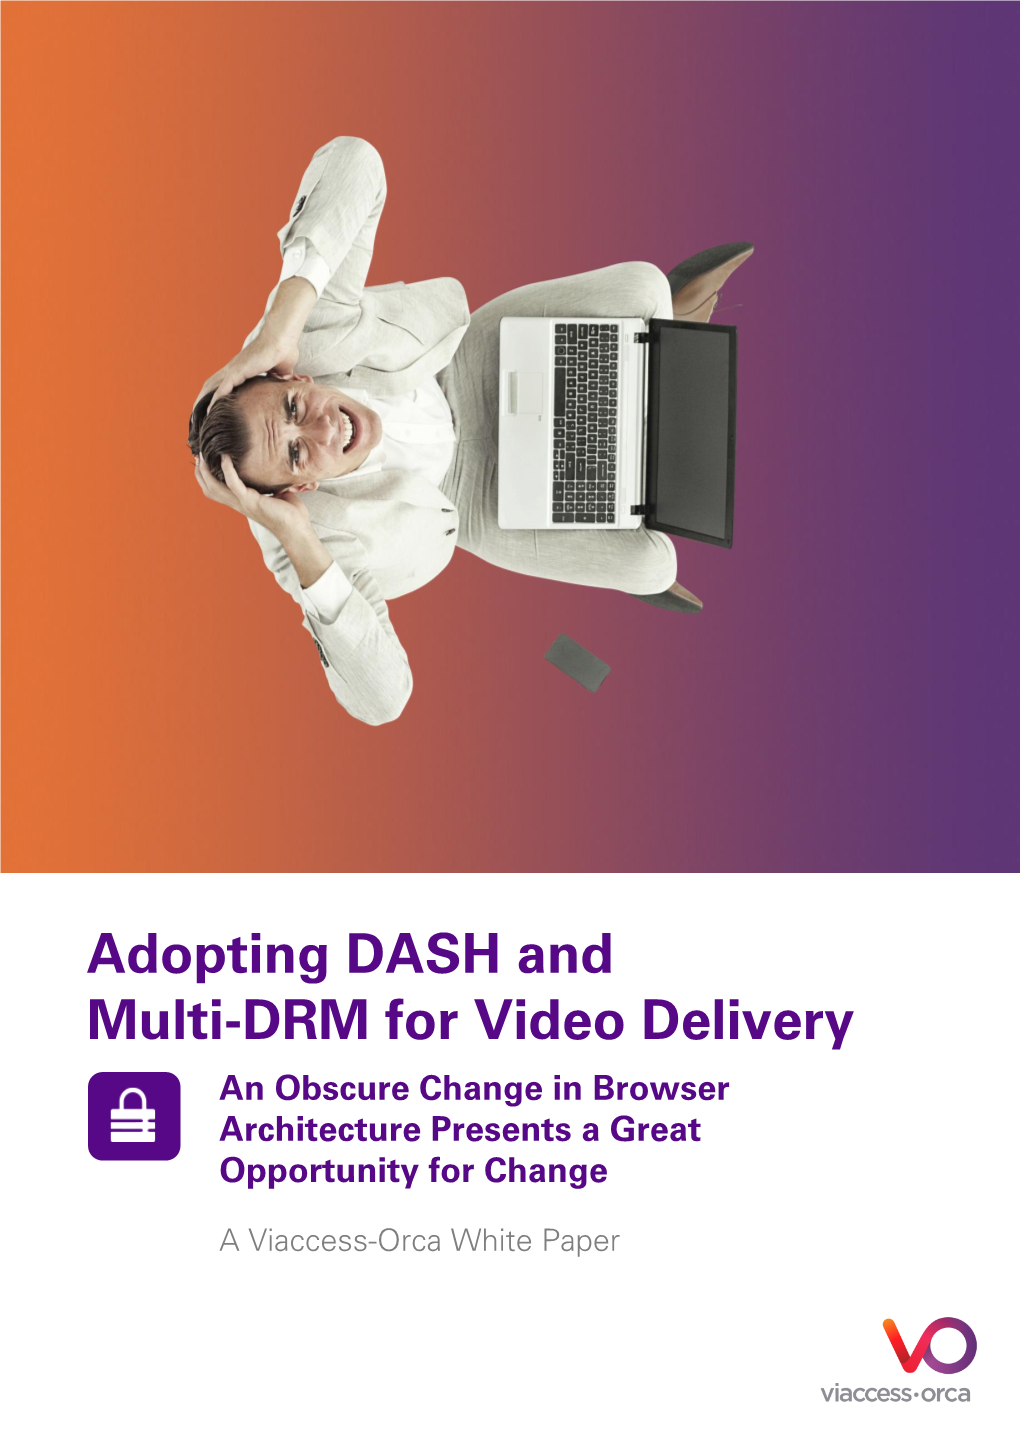 Adopting DASH and Multi-DRM for Video Delivery an Obscure Change in Browser Architecture Presents a Great Opportunity for Change